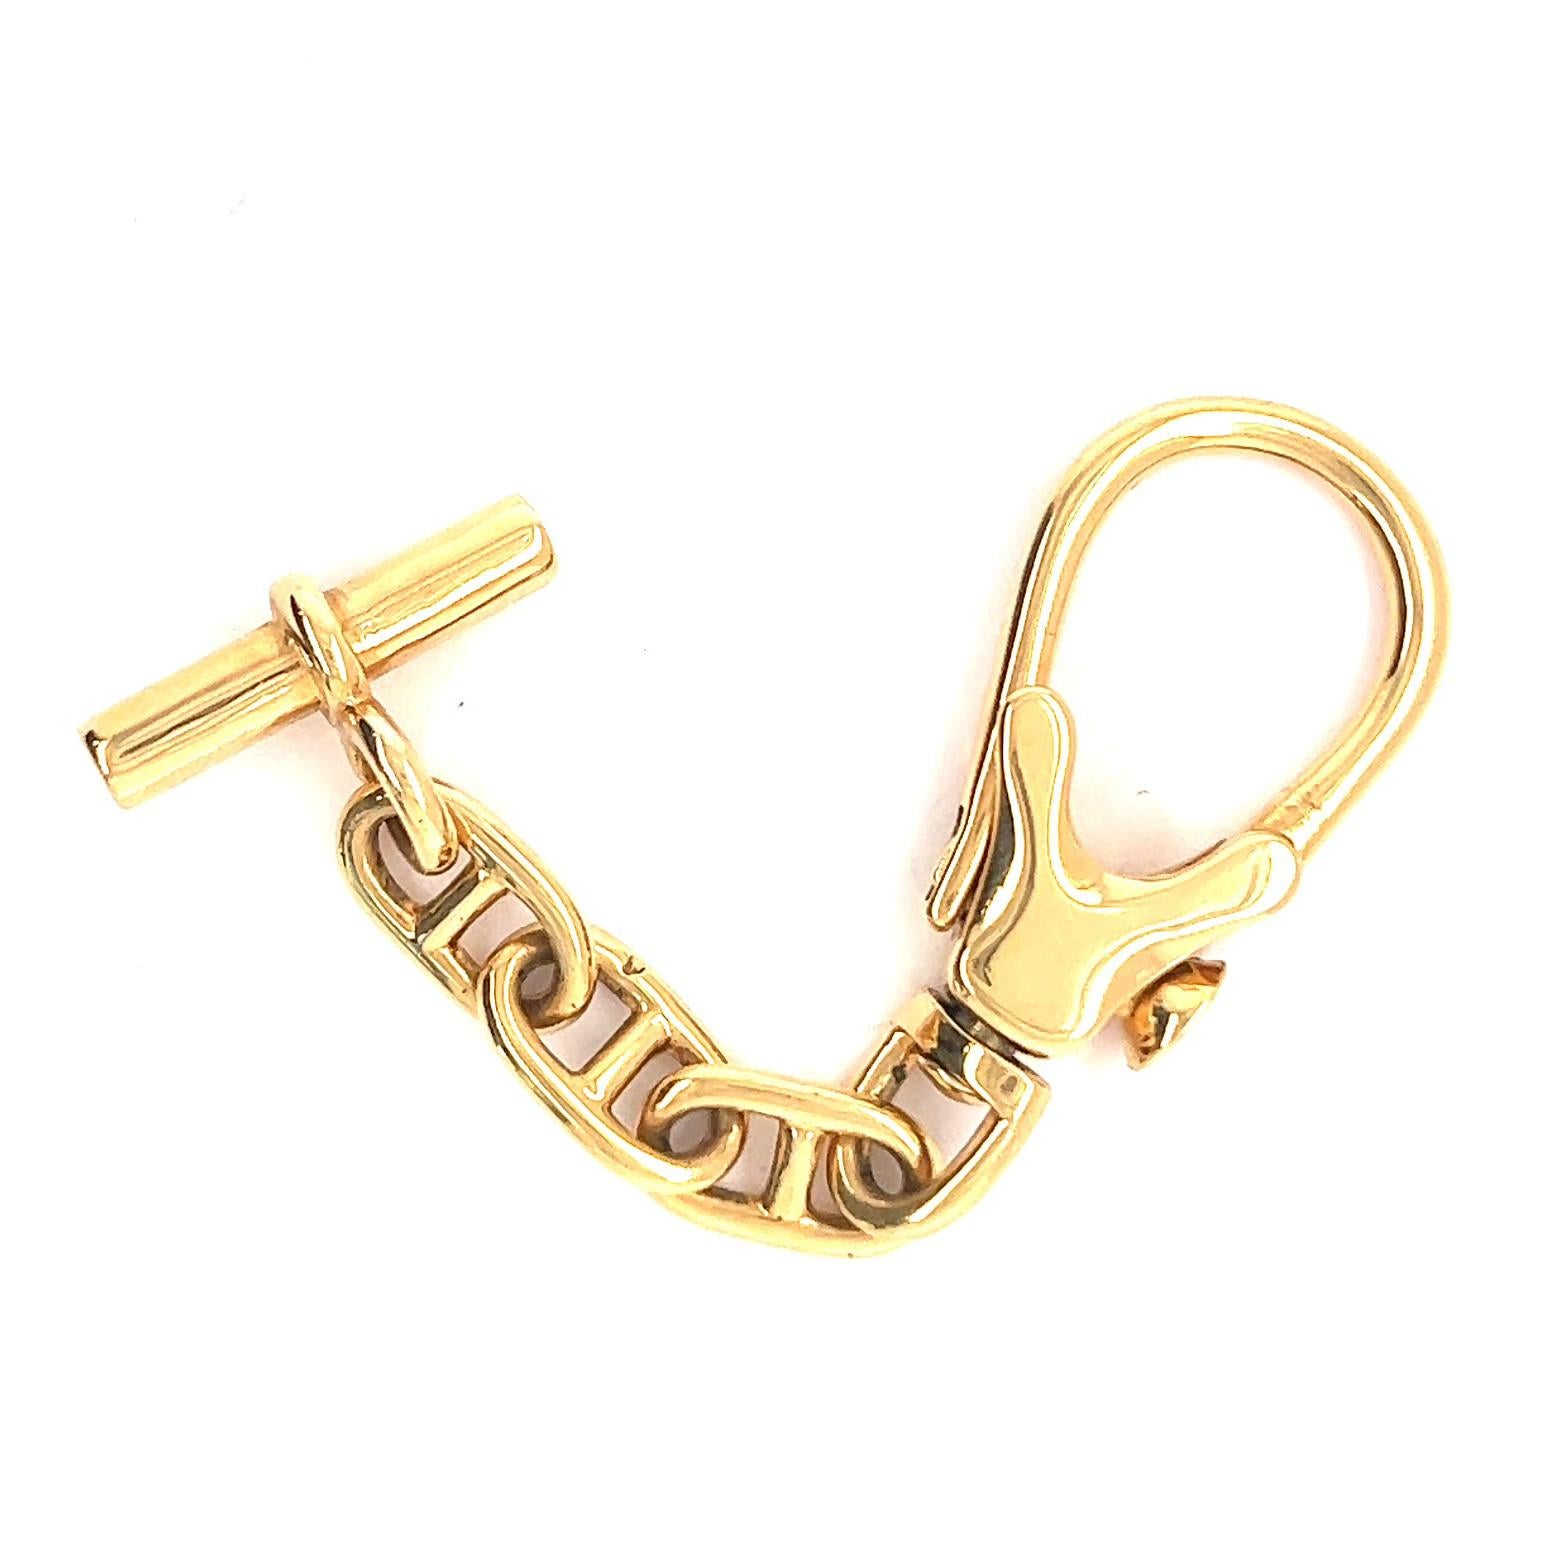 One Vintage Hermes 18 Karat Gold Key Chain. Crafted in 18 karat yellow gold, signed Hermes Paris. Circa 1960s. The keychain measures 3 inches in length. 

About this Item: This Vintage Hermes Gold Key Chain is a classic must-have to add